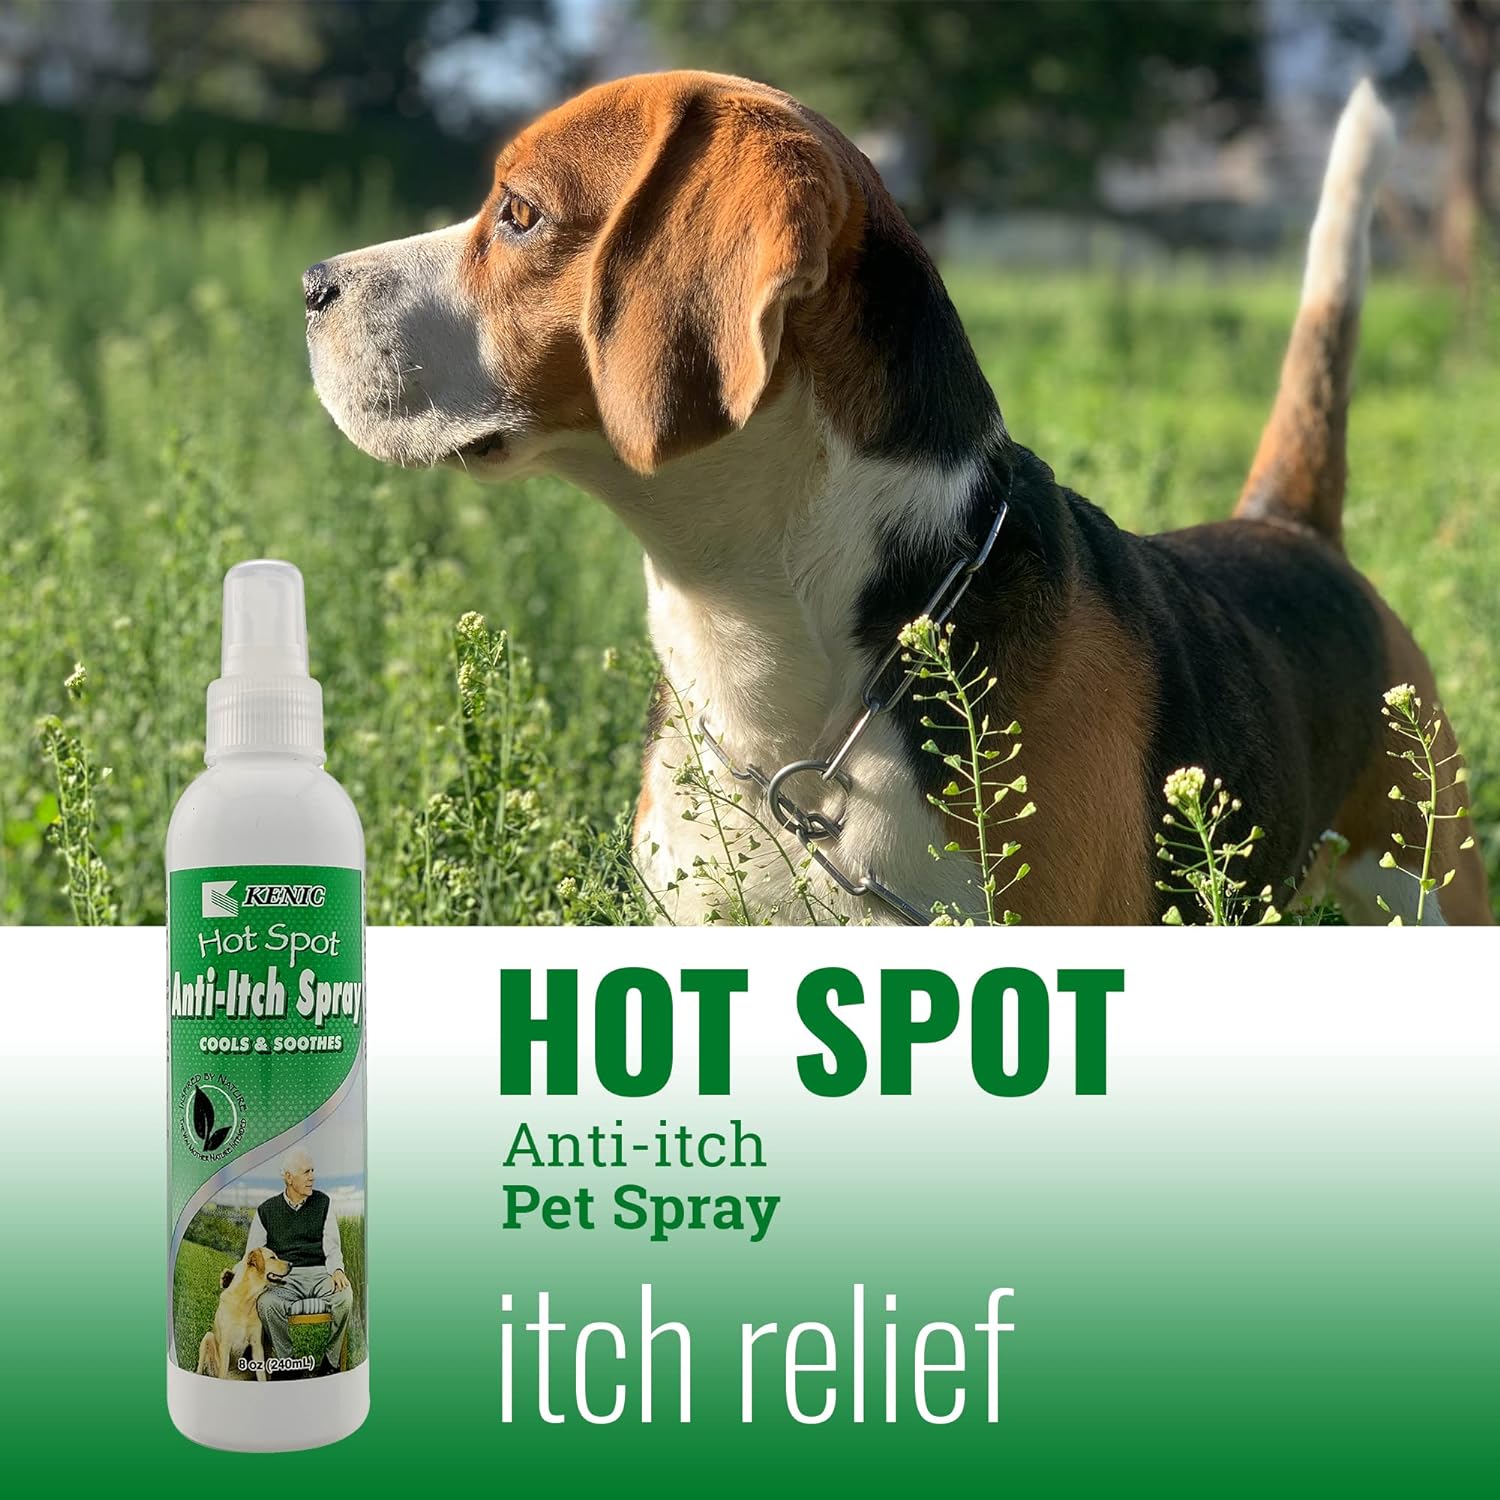 Kenic Ultra Cooling Hot Spot and Anti-Itch Pet Spray for Dog